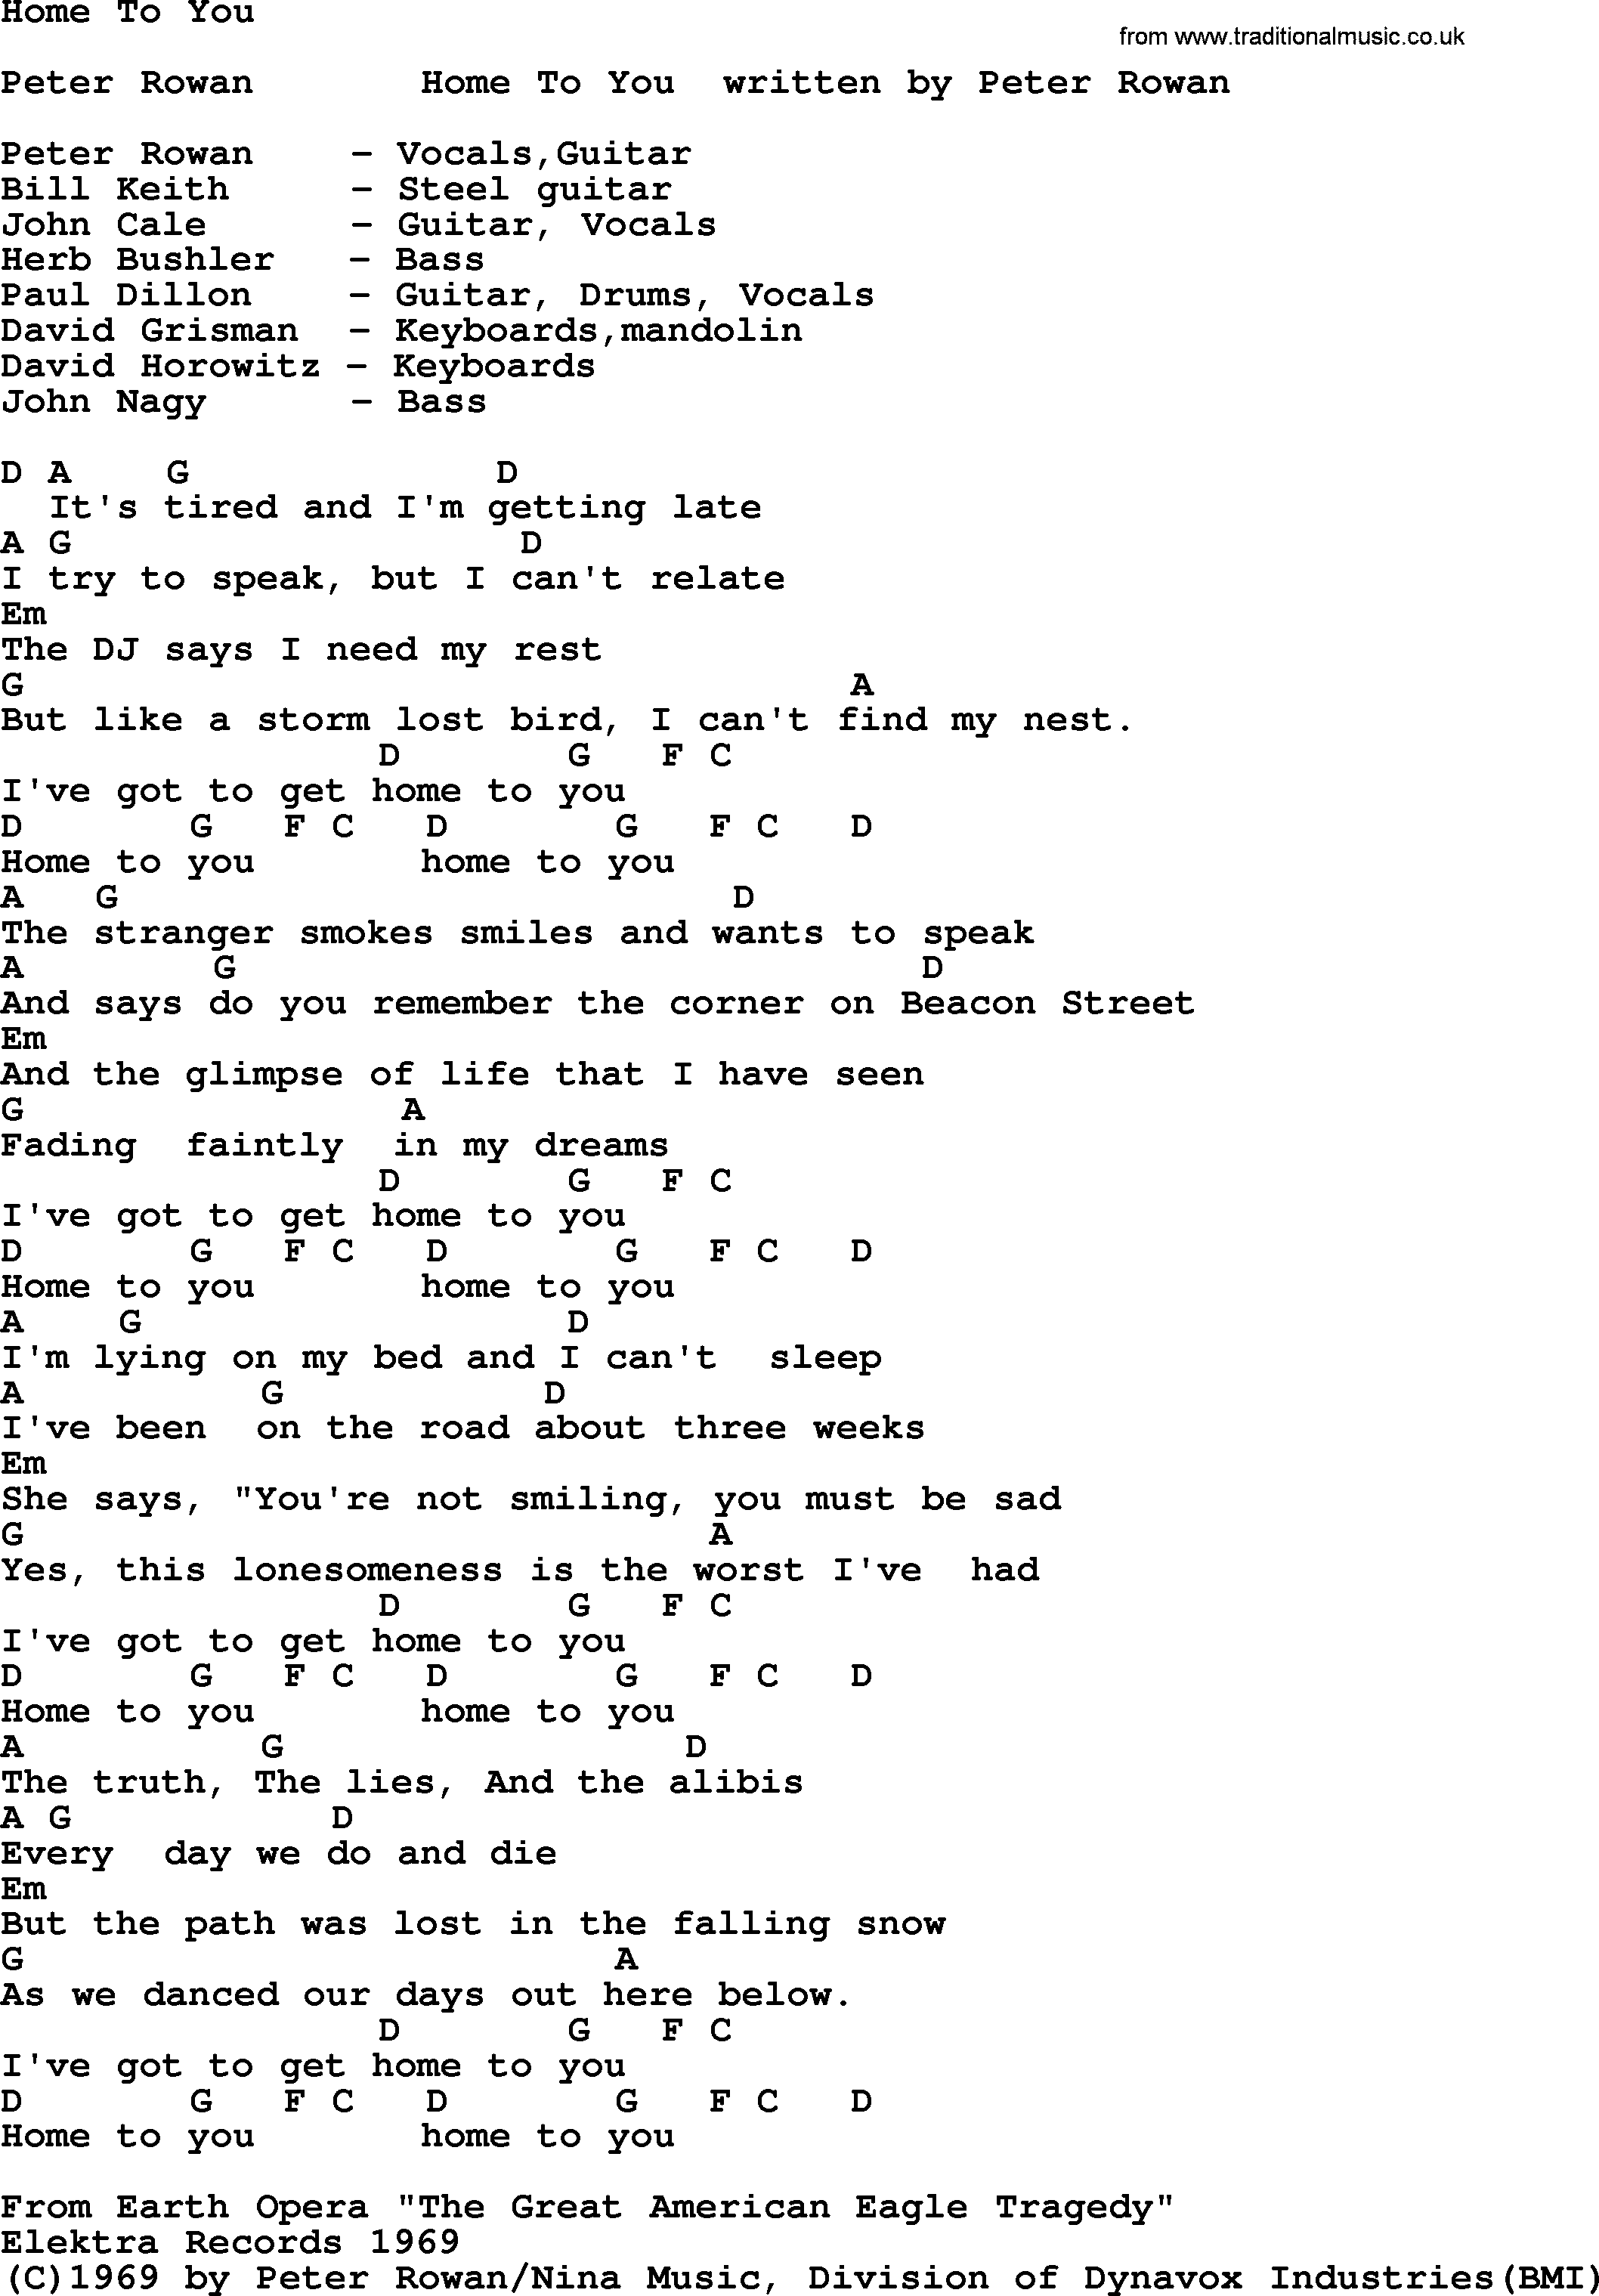 Bluegrass song: Home To You, lyrics and chords